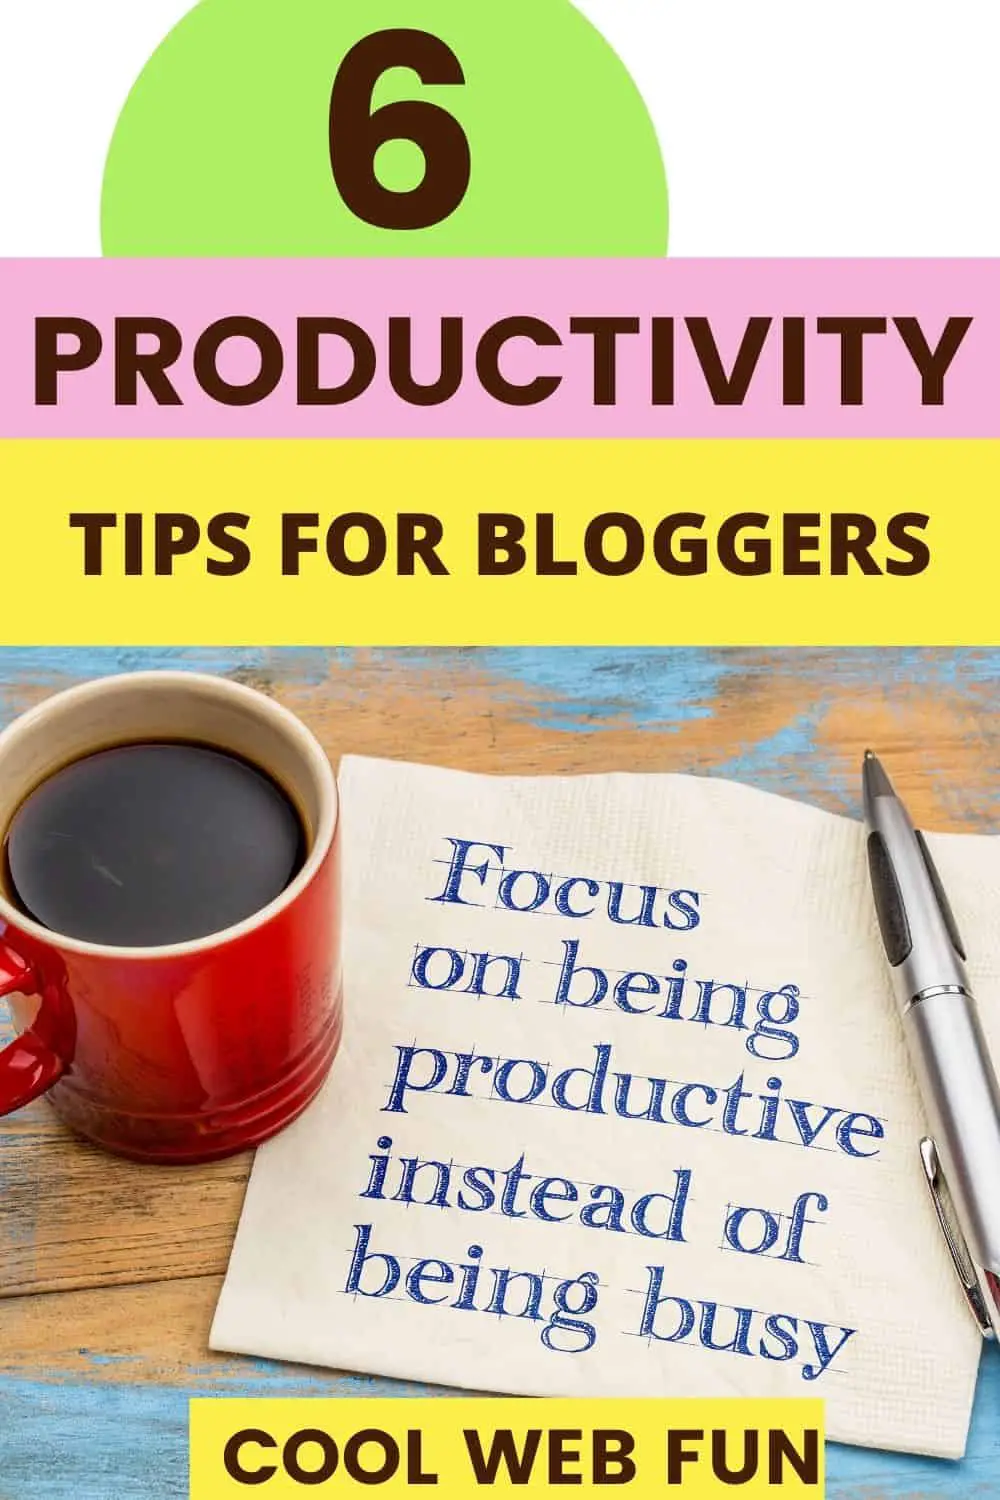 PRODUCTIVITY FOR BLOGGERS